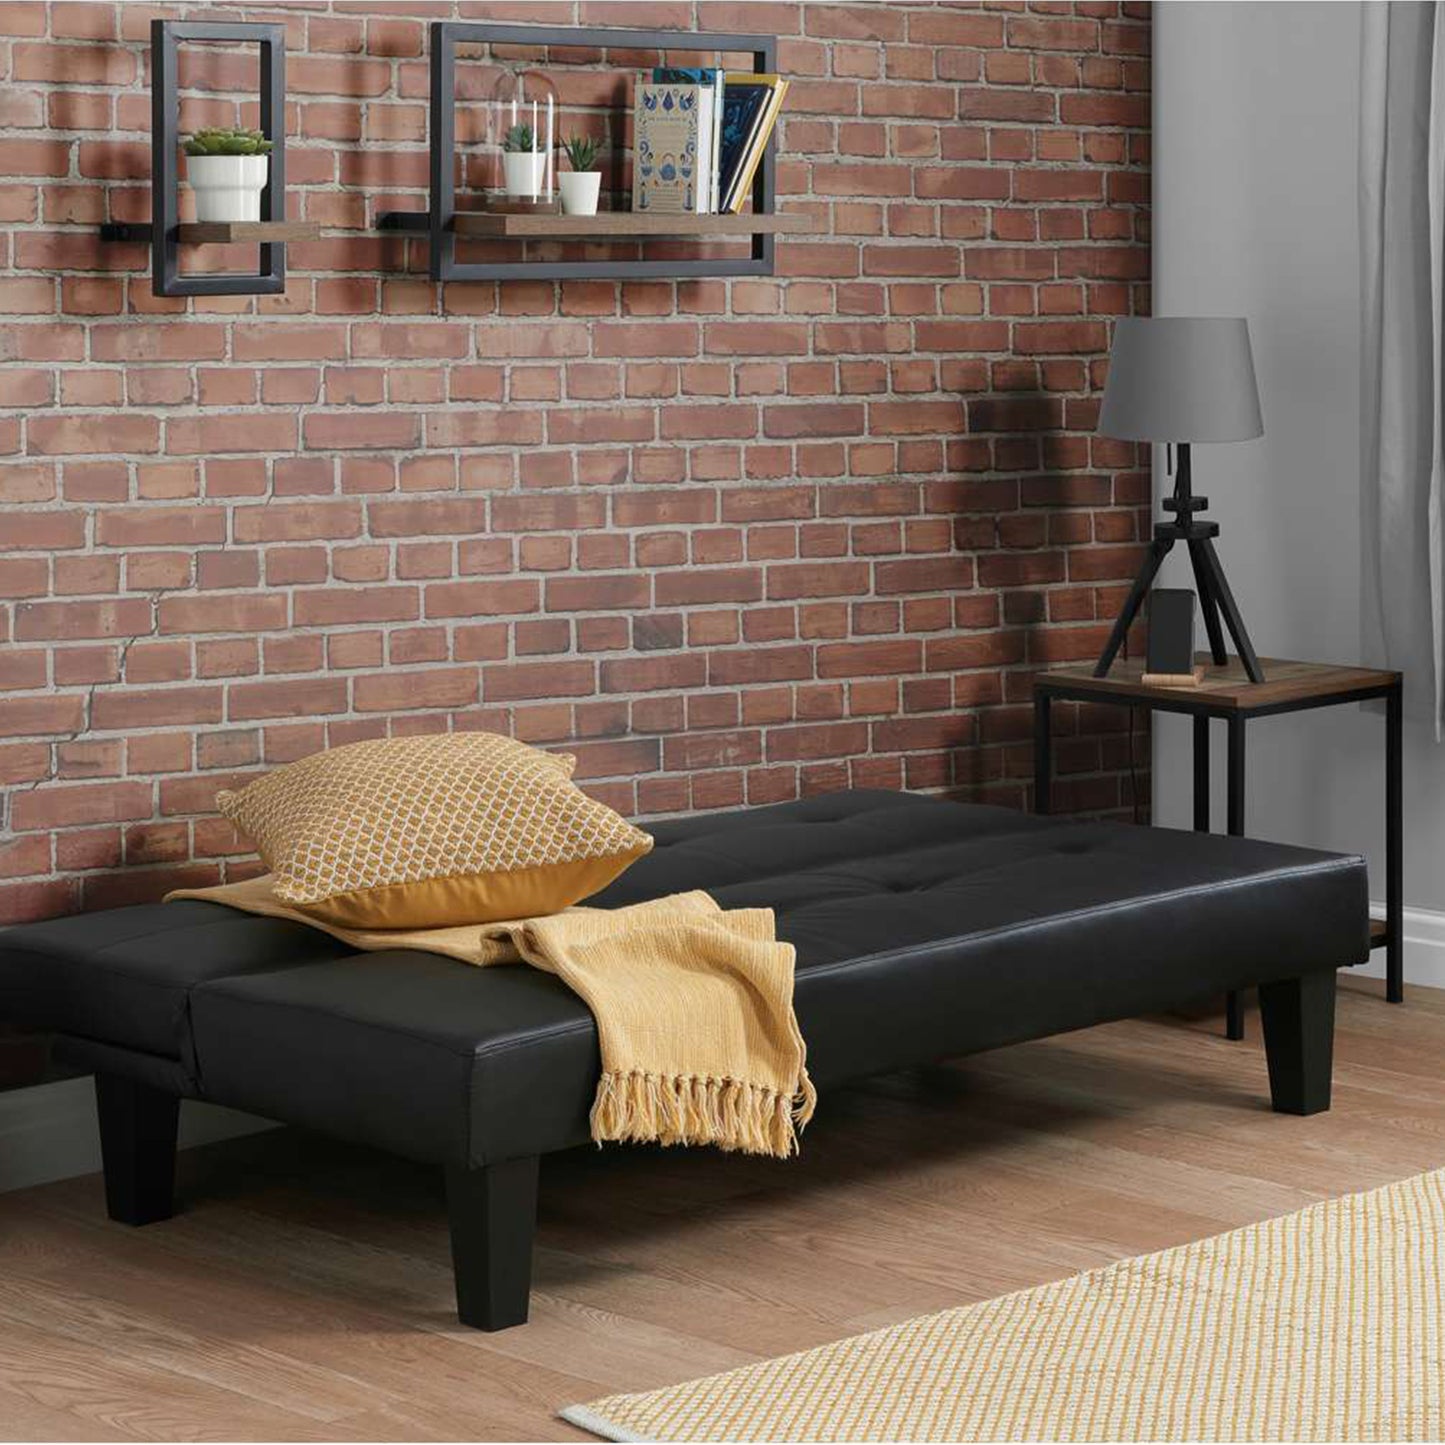 Franklin Black Faux Leather Sofa Bed